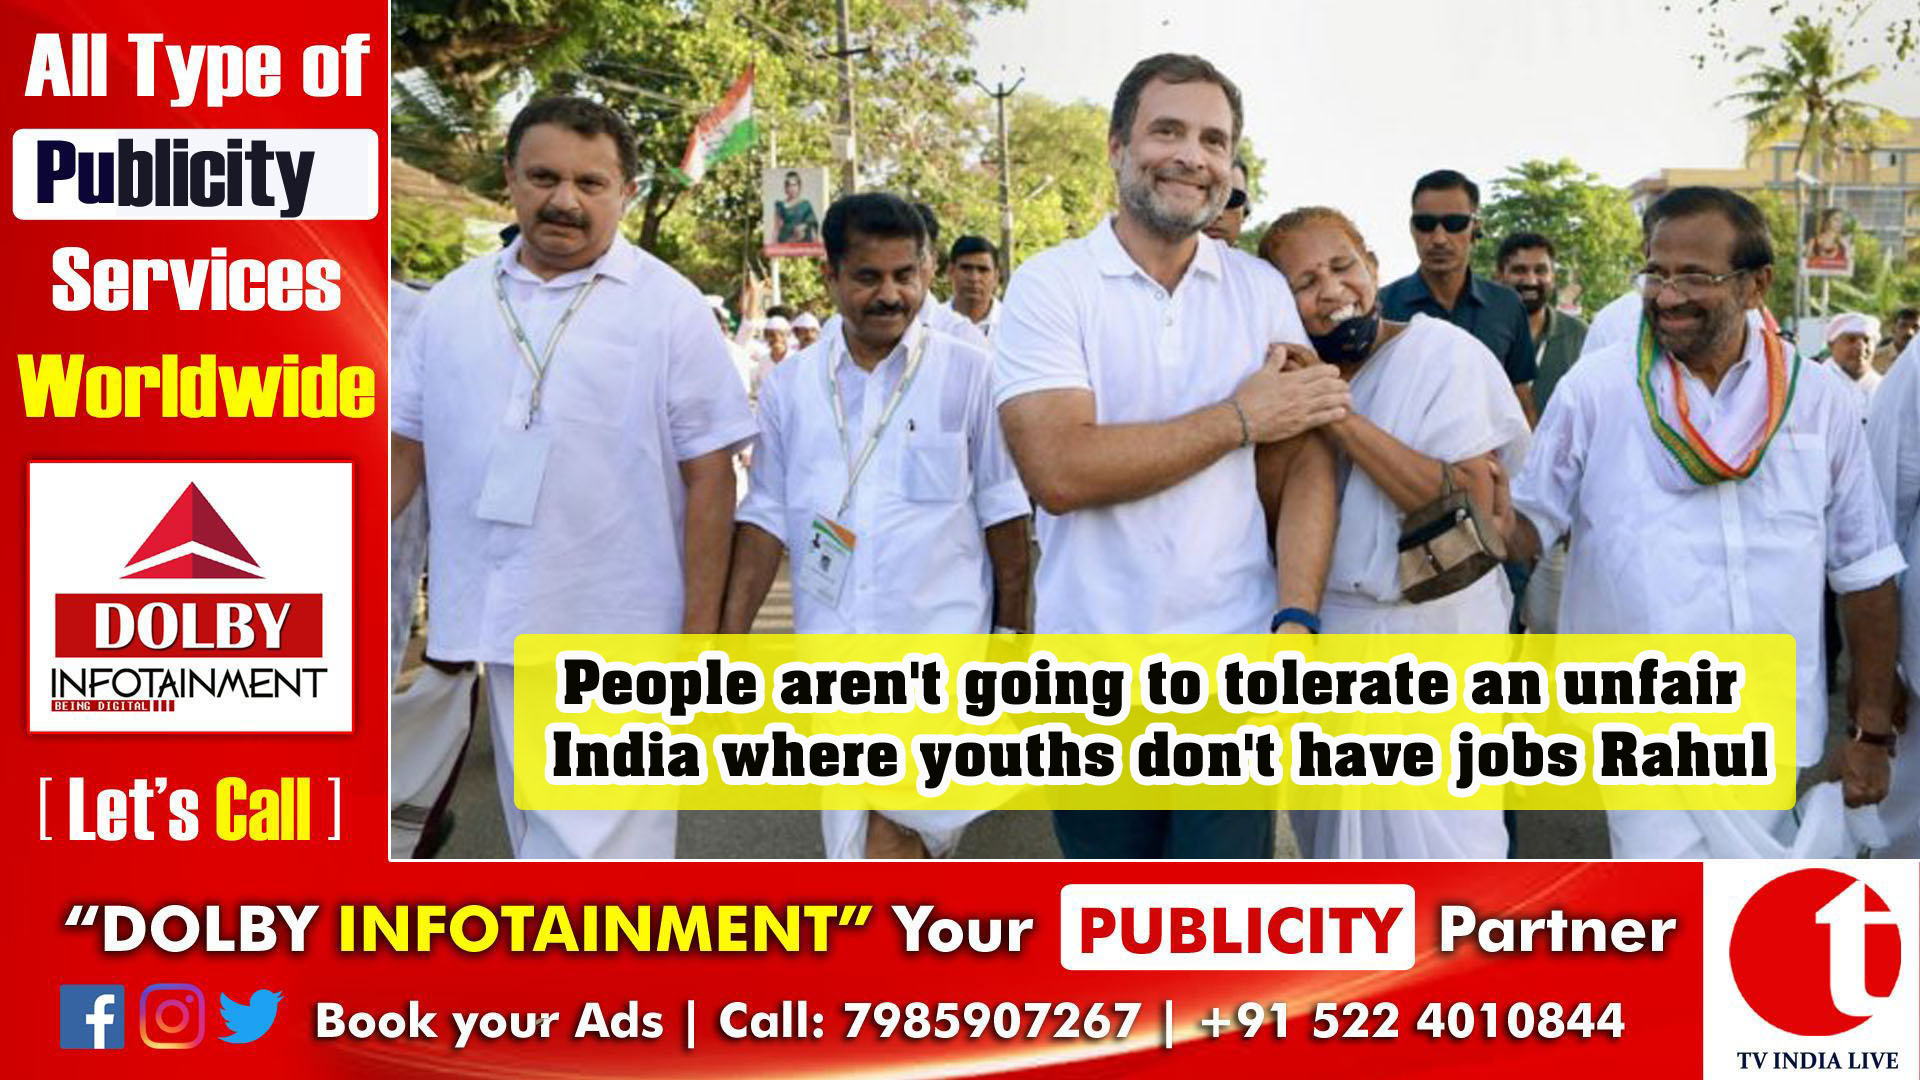 People aren't going to tolerate an unfair India where youths don't have jobs Rahul